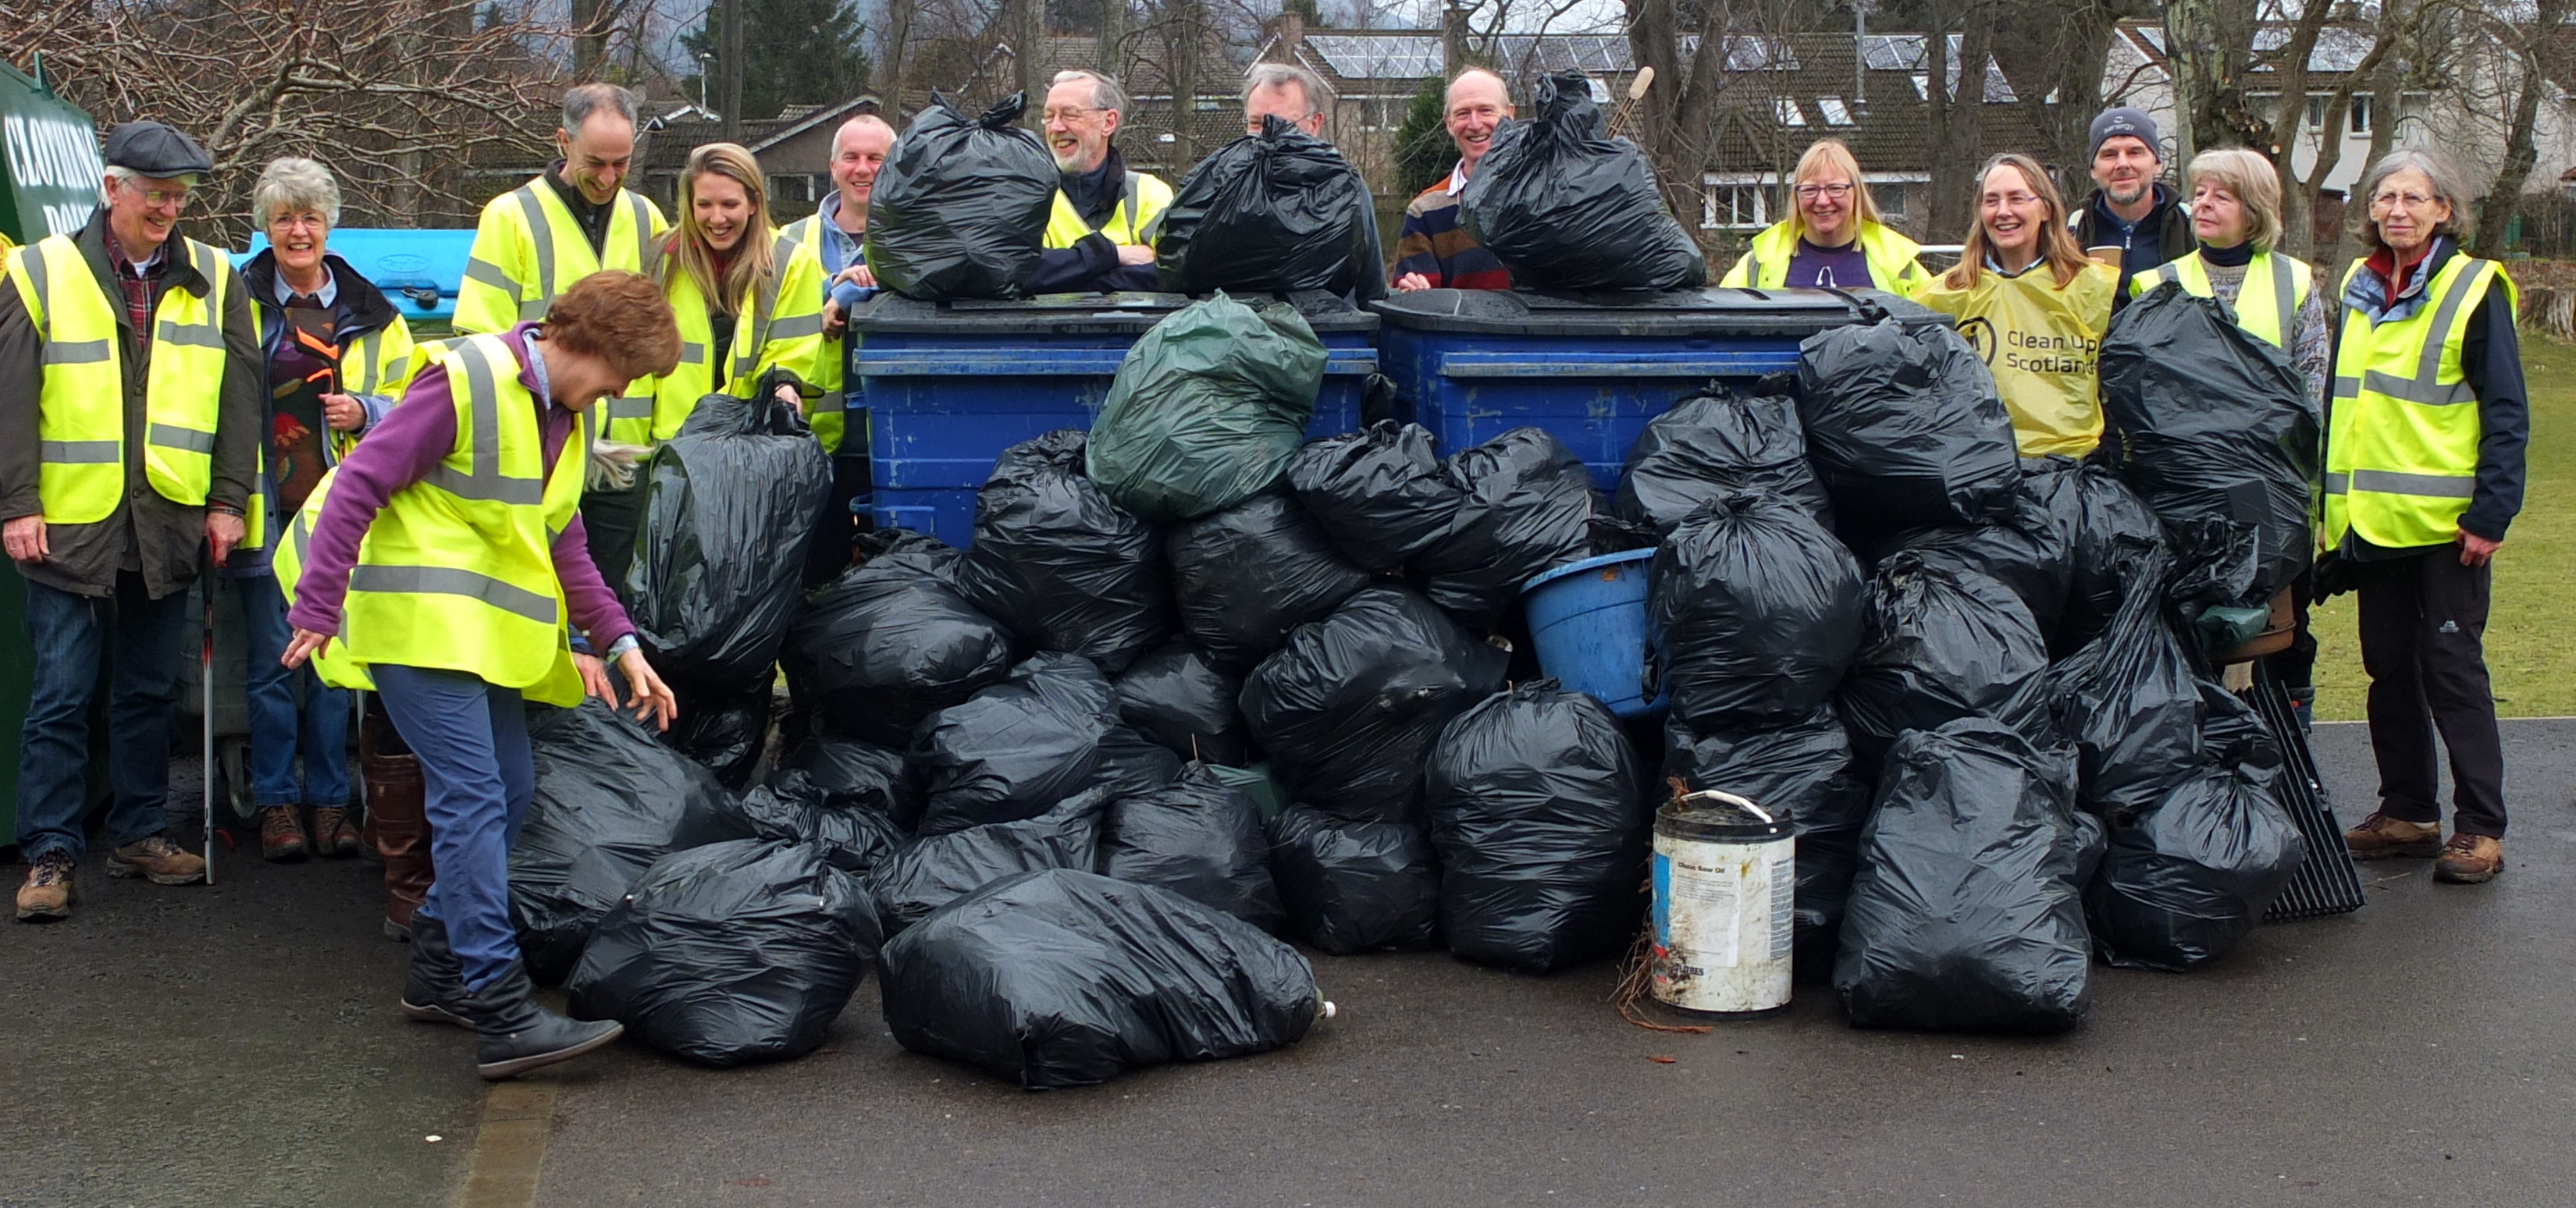 Volunteers from Monymusk pick up rubbish from the roadside